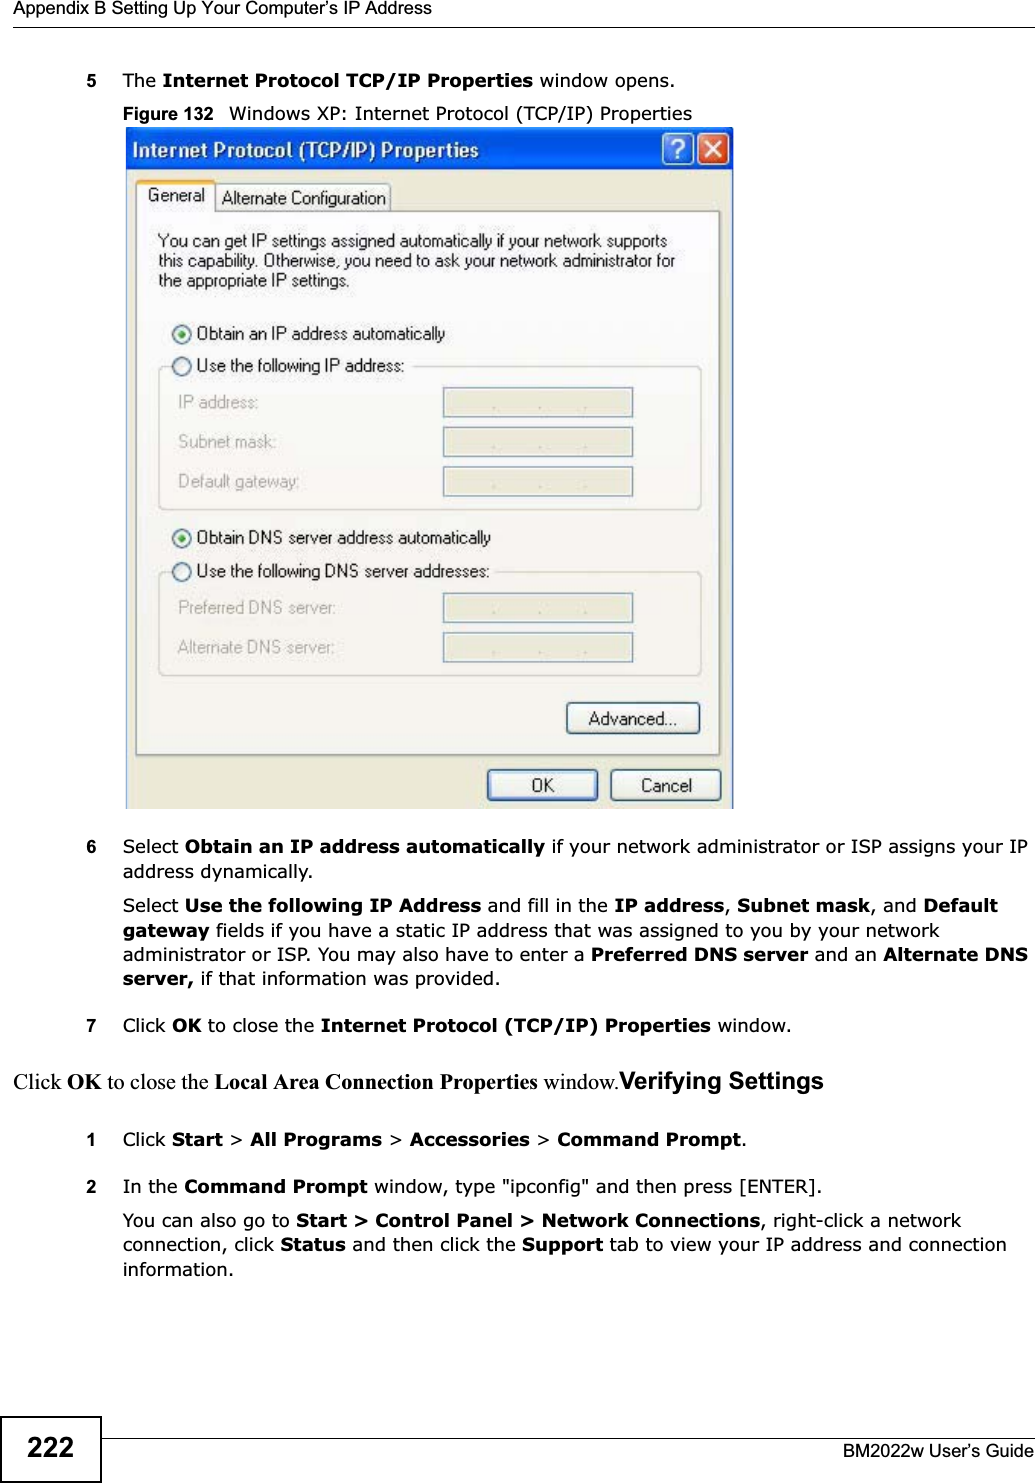 Appendix B Setting Up Your Computer’s IP AddressBM2022w User’s Guide2225The Internet Protocol TCP/IP Properties window opens.Figure 132   Windows XP: Internet Protocol (TCP/IP) Properties6Select Obtain an IP address automatically if your network administrator or ISP assigns your IP address dynamically.Select Use the following IP Address and fill in the IP address,Subnet mask, and Default gateway fields if you have a static IP address that was assigned to you by your network administrator or ISP. You may also have to enter a Preferred DNS server and an Alternate DNSserver, if that information was provided.7Click OK to close the Internet Protocol (TCP/IP) Properties window.Click OK to close the Local Area Connection Properties window.Verifying Settings1Click Start &gt; All Programs &gt; Accessories &gt; Command Prompt.2In the Command Prompt window, type &quot;ipconfig&quot; and then press [ENTER]. You can also go to Start &gt; Control Panel &gt; Network Connections, right-click a network connection, click Status and then click the Support tab to view your IP address and connection information.